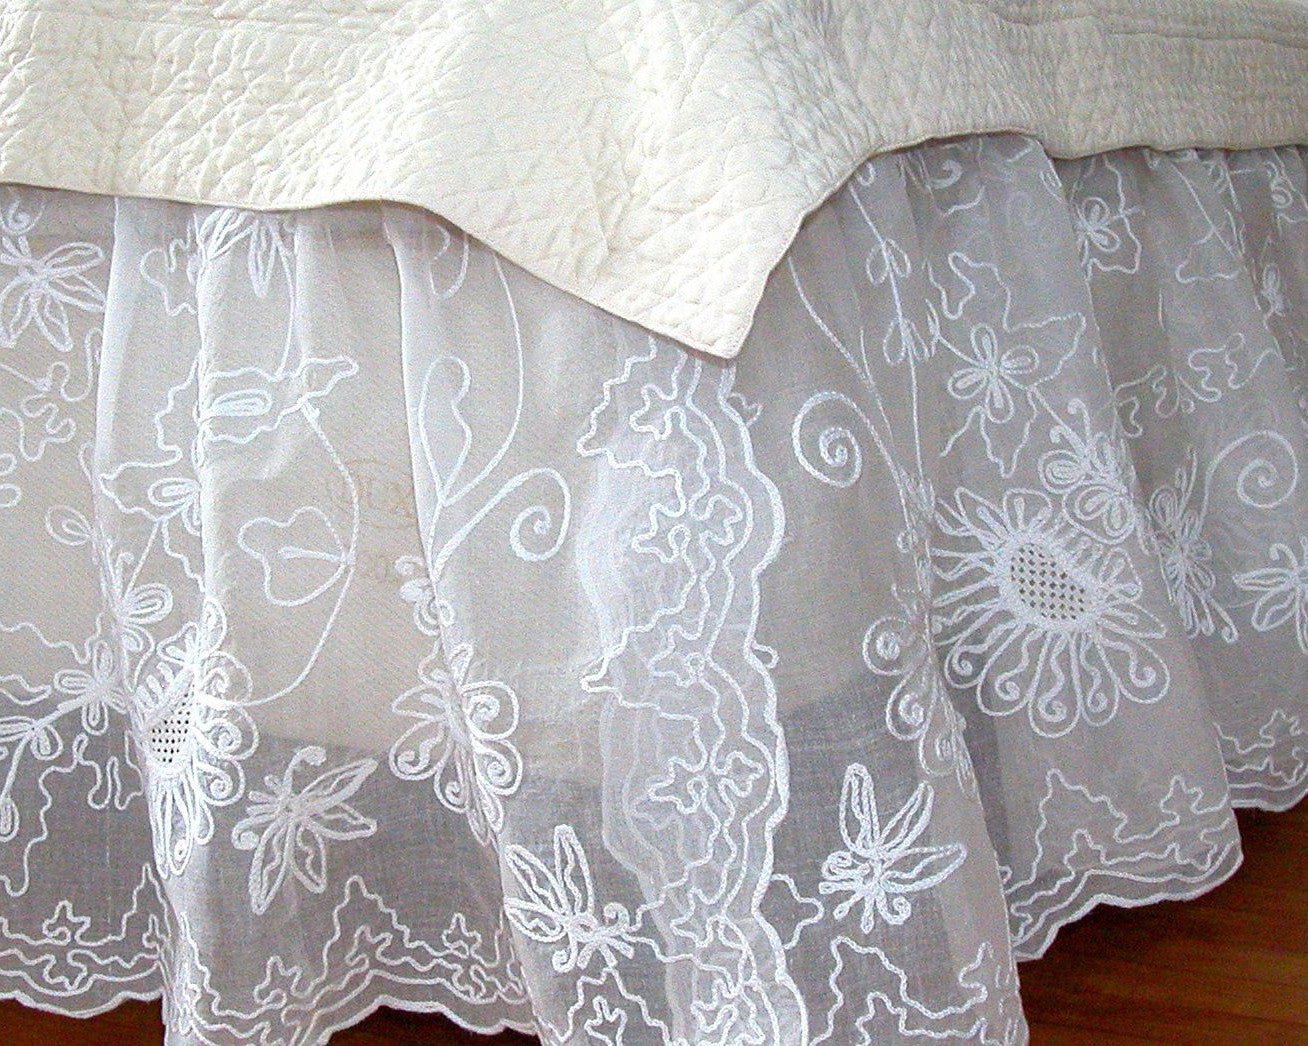 Charming dust skirt, embroidered with sunflower like pattern on 100% cotton organdy.